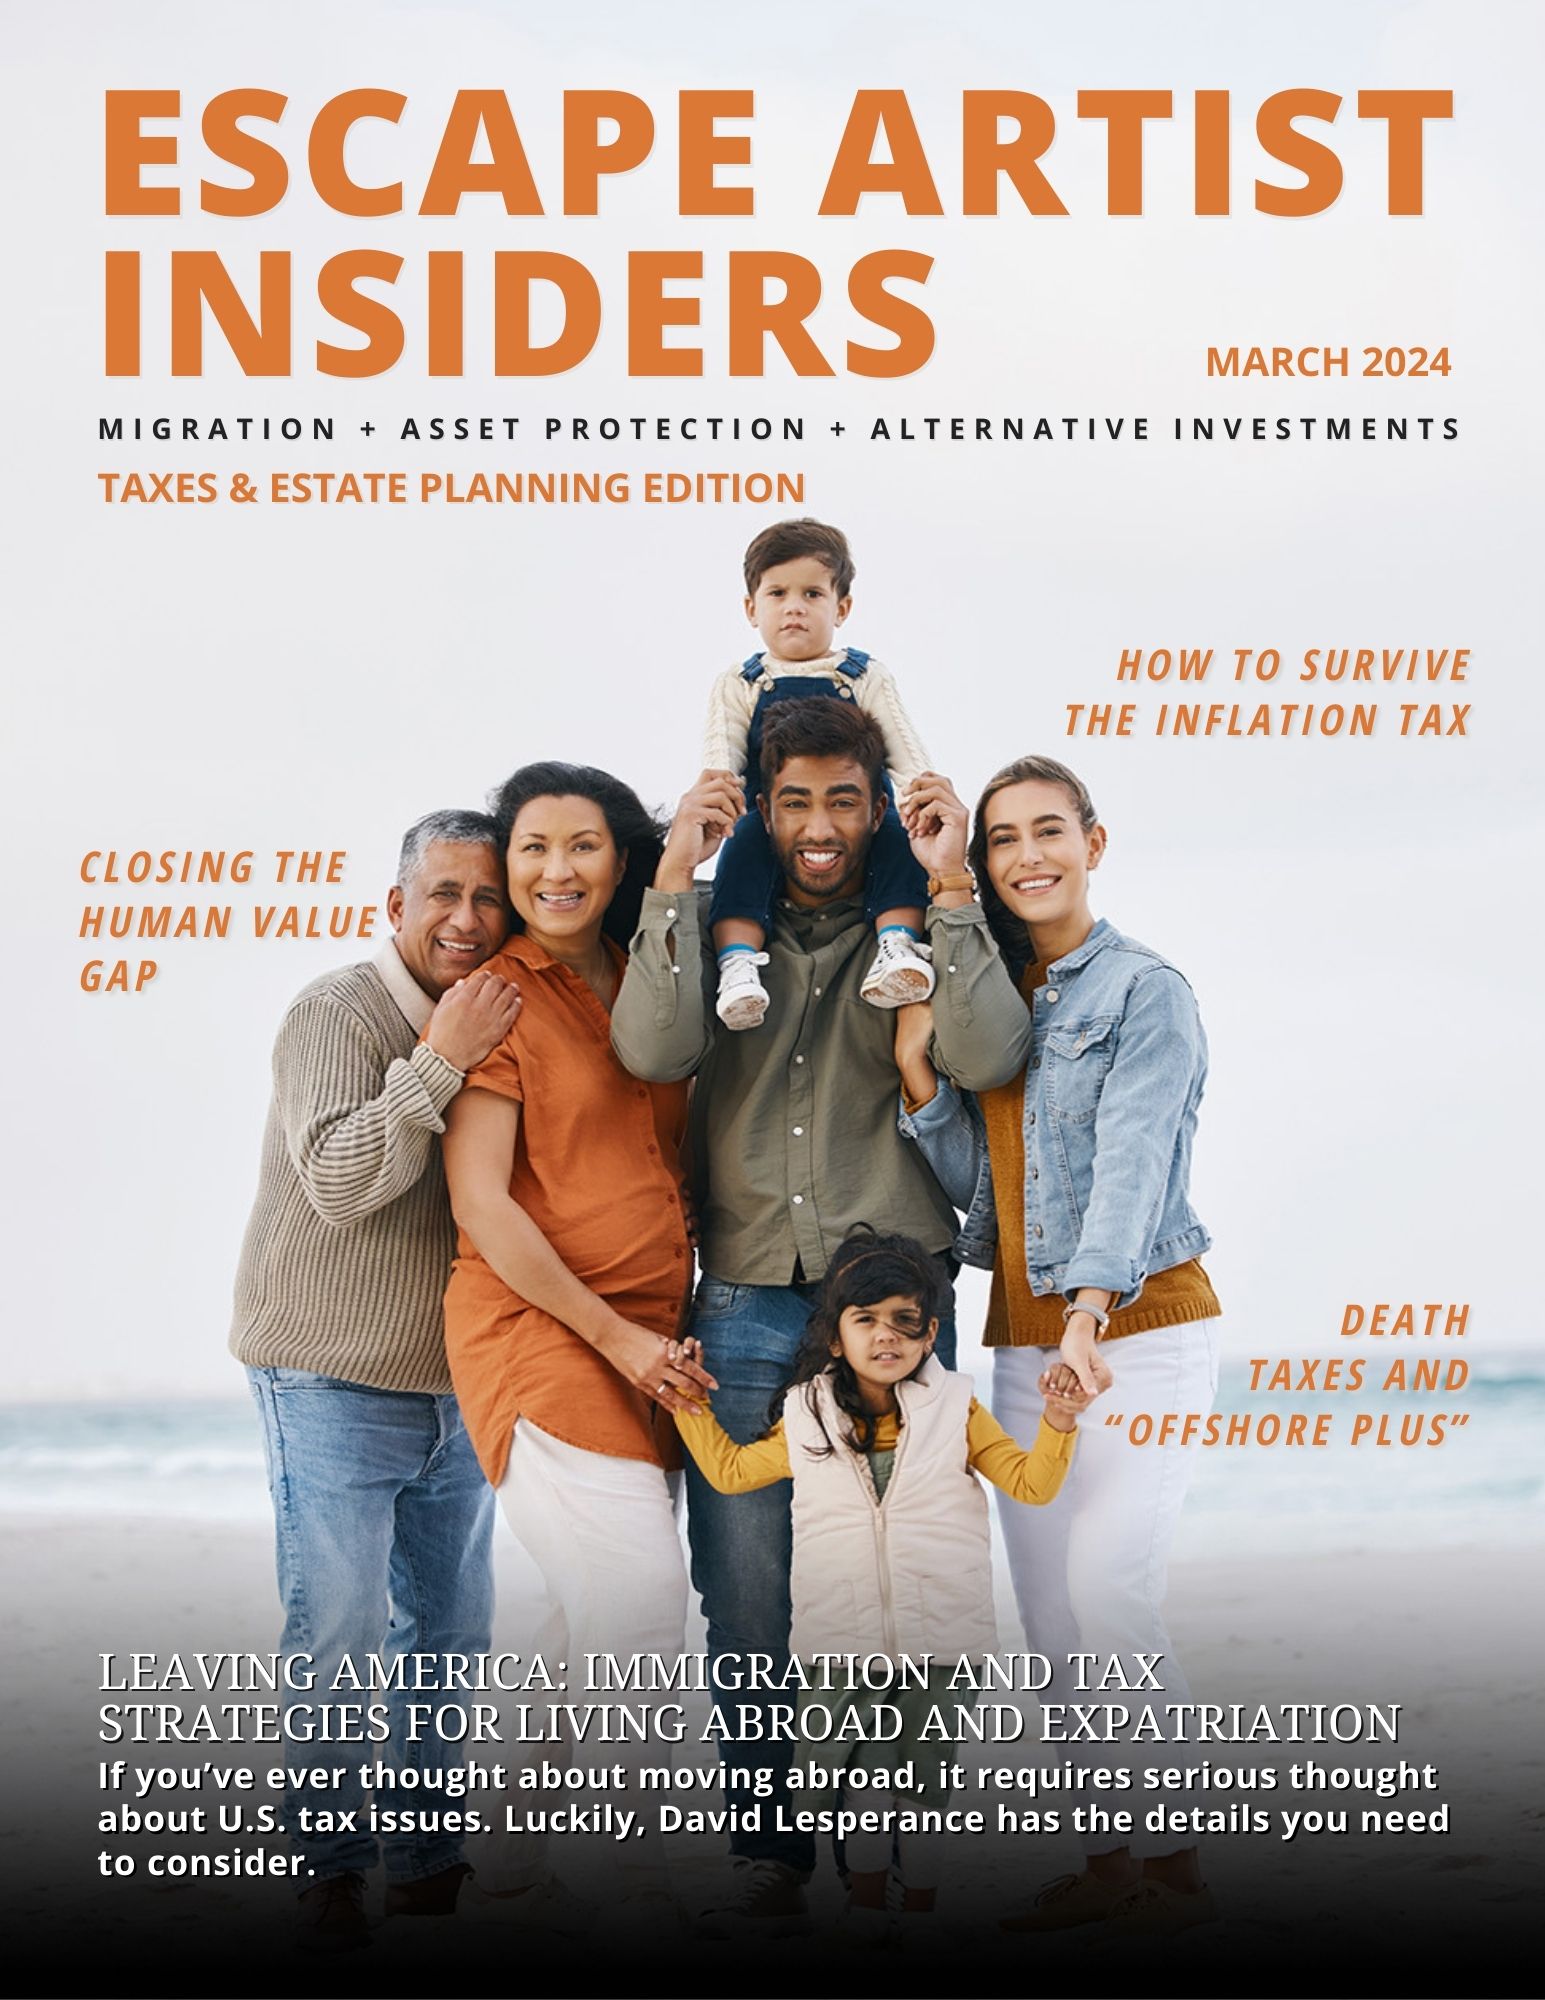 Escape Artist Insiders Magazine: Inside March 2024’s “Taxes and Estate Planning” Edition